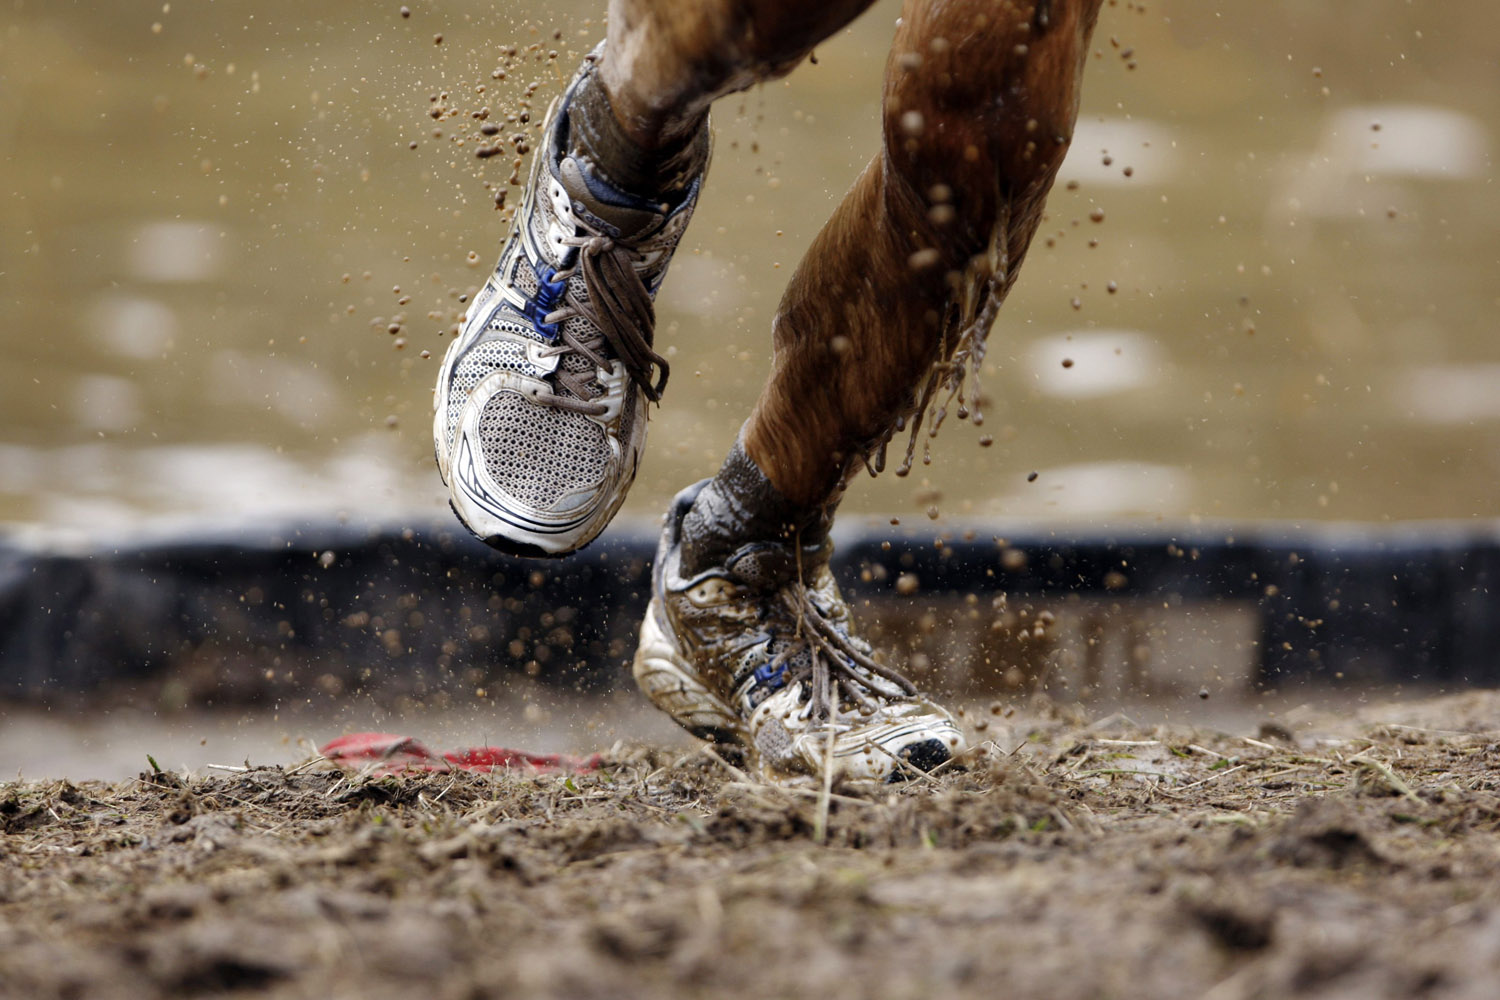 July 15, 2012. Mud flies off a competitor's shoes as he runs out of an obstacle during the Tough Mudder at Mt. Snow in West Dover, Vermont.